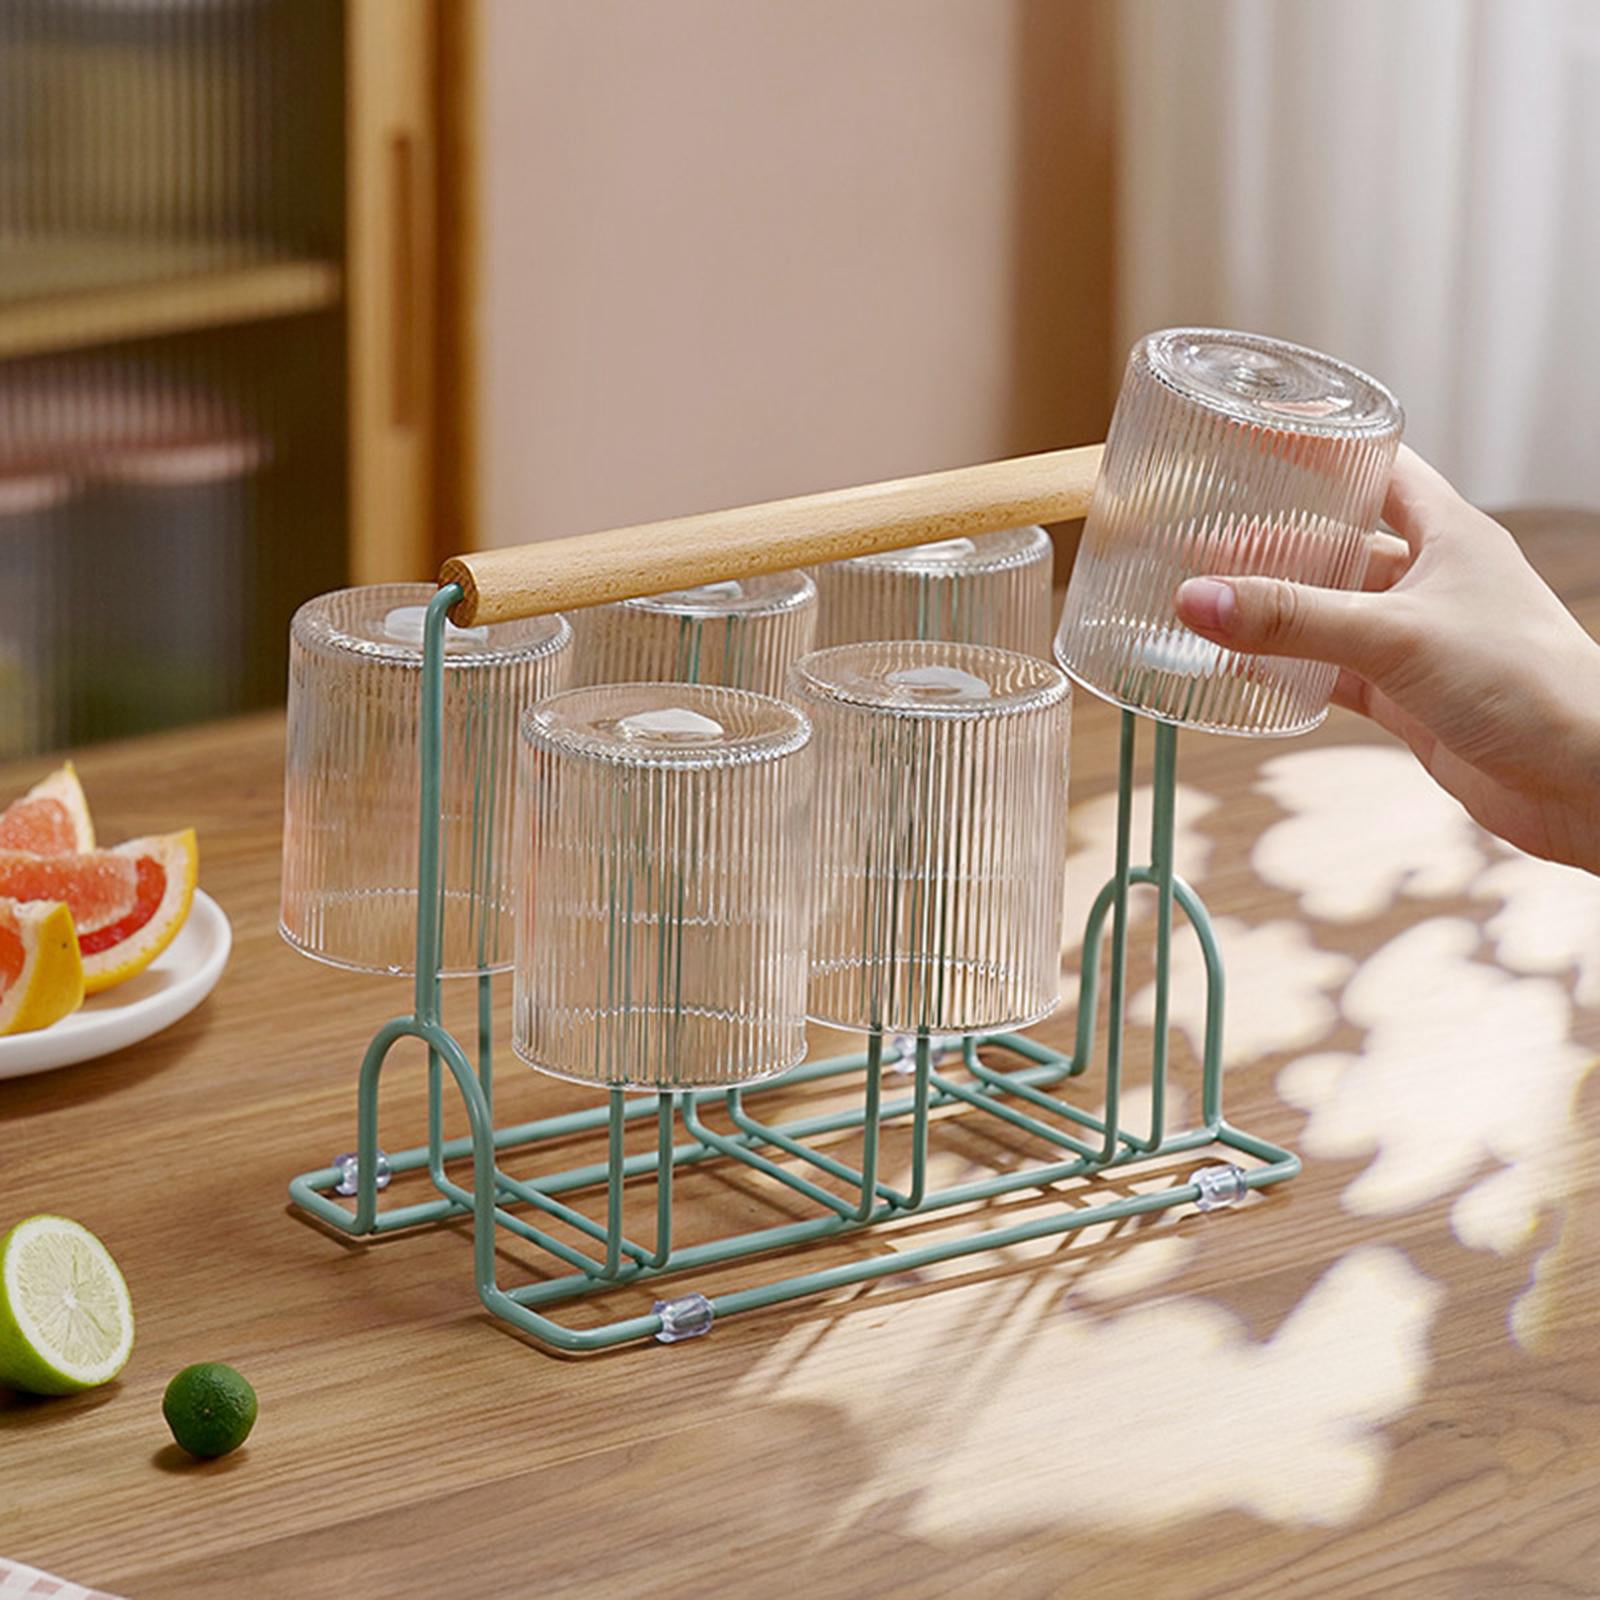 Woiworco Wooden Bottle Drying Rack, Nature Bamboo Retractable Cup Drying  Rack and Mug Tree, Dish Drying Rack and Cup Drying Stander Holder for Cup